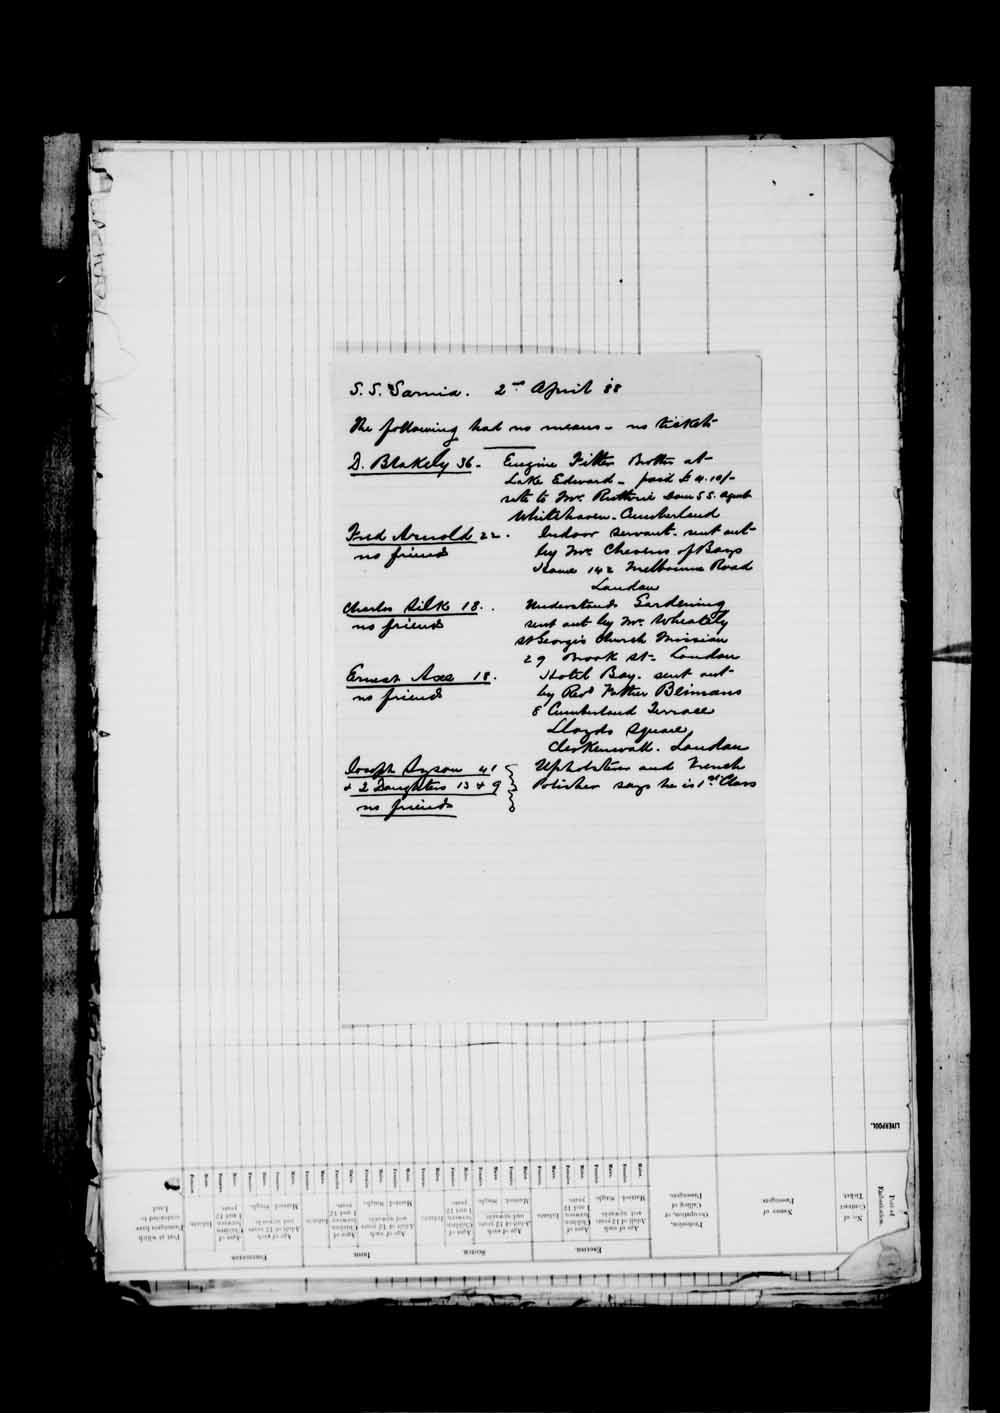 Digitized page of Passenger Lists for Image No.: e003674502